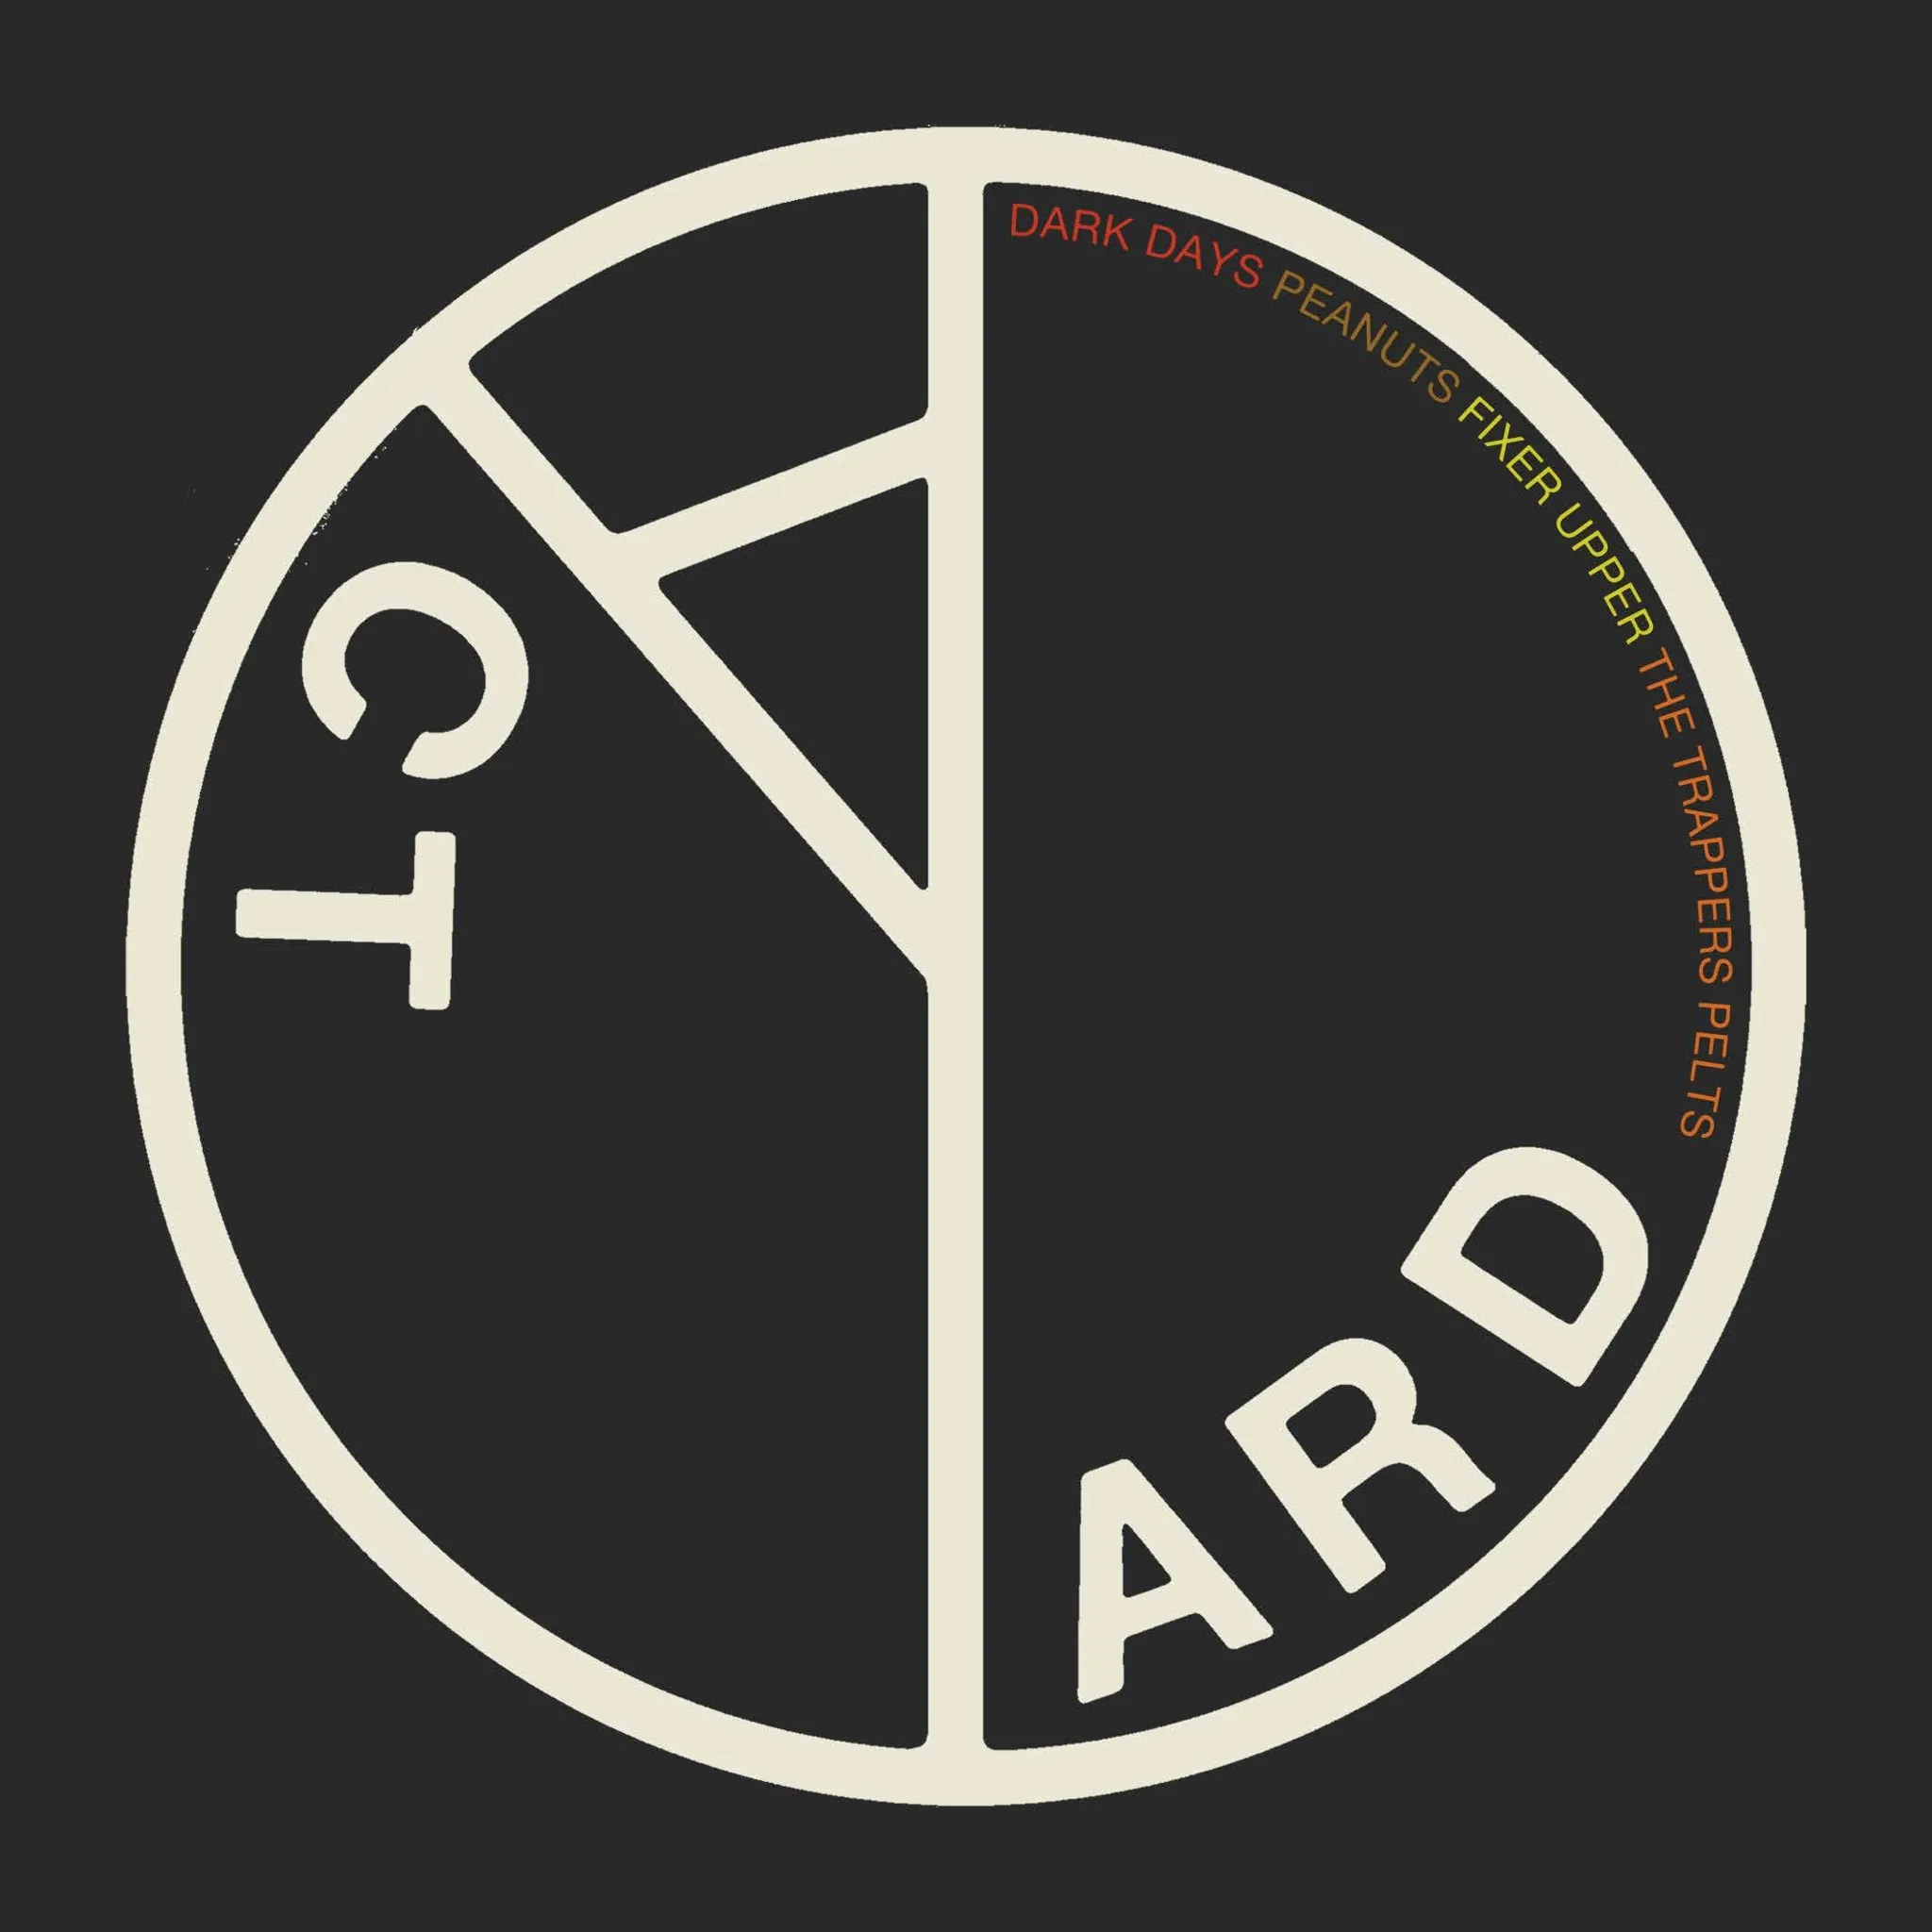 <strong>Yard Act - Dark Days EP</strong> (Tape)